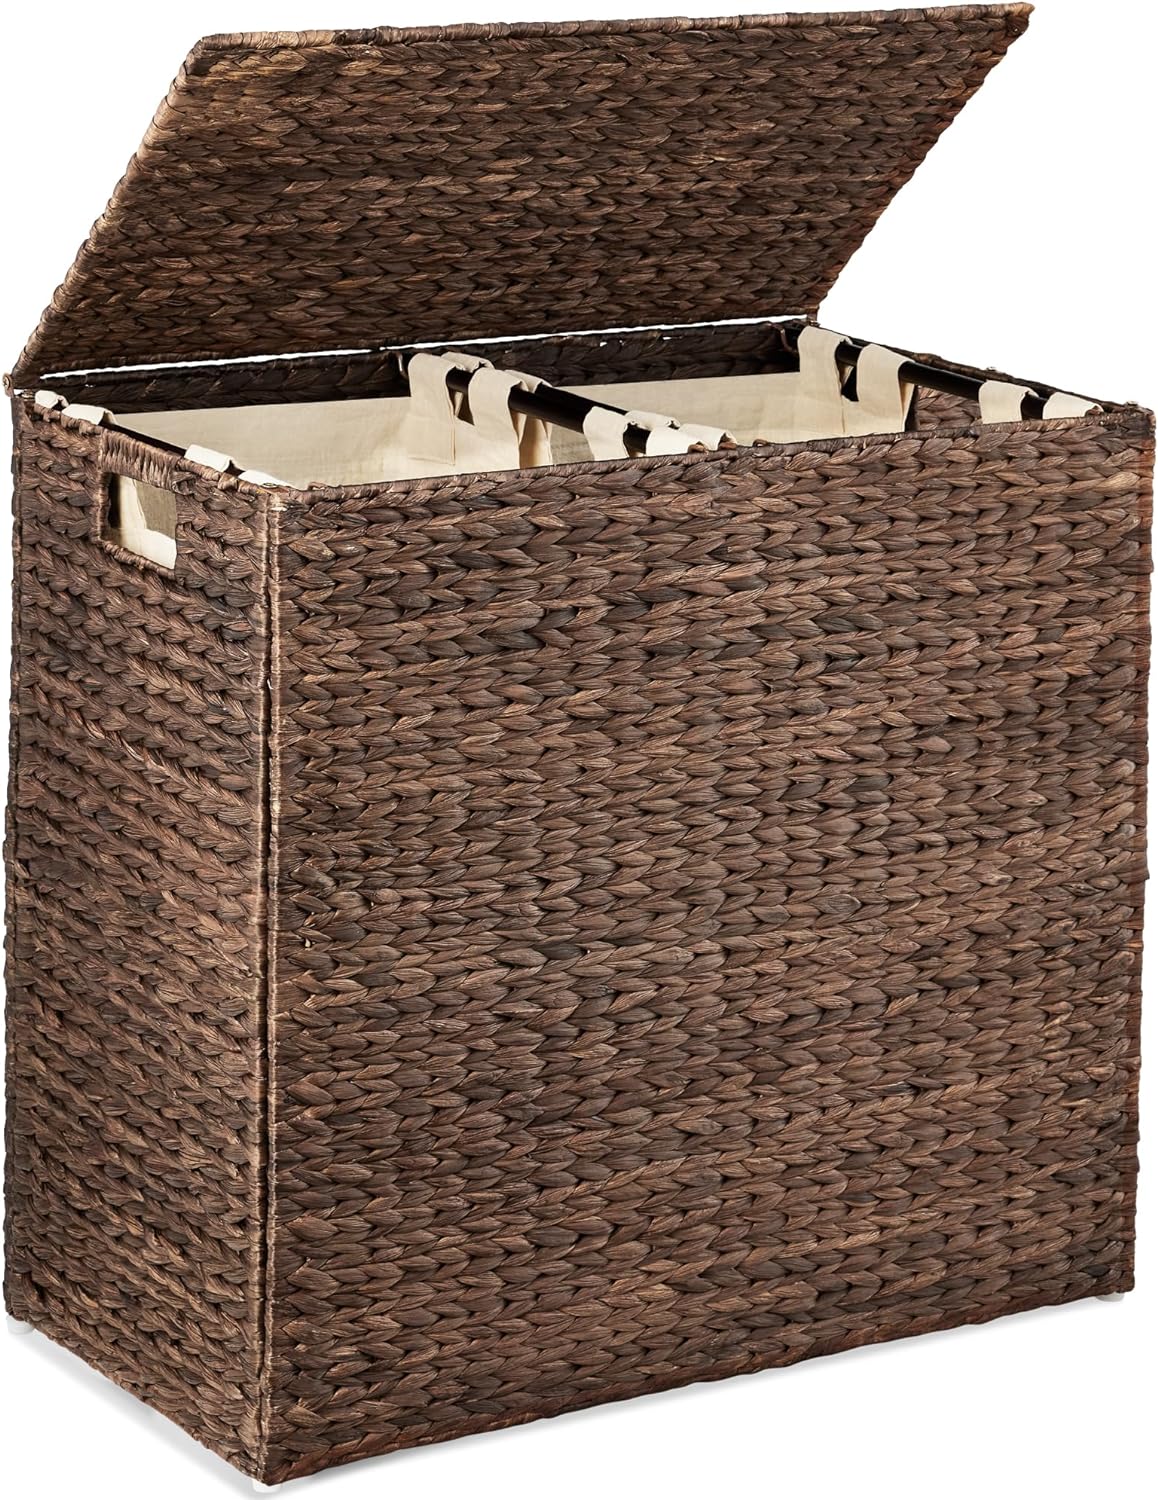 Best Choice Products Large Double Laundry Hamper with Lid, Natural Handwoven Water Hyacinth, 2 Sections w/ 2 Machine Washable Linen Liner Bags, Portable, Handles - Espresso